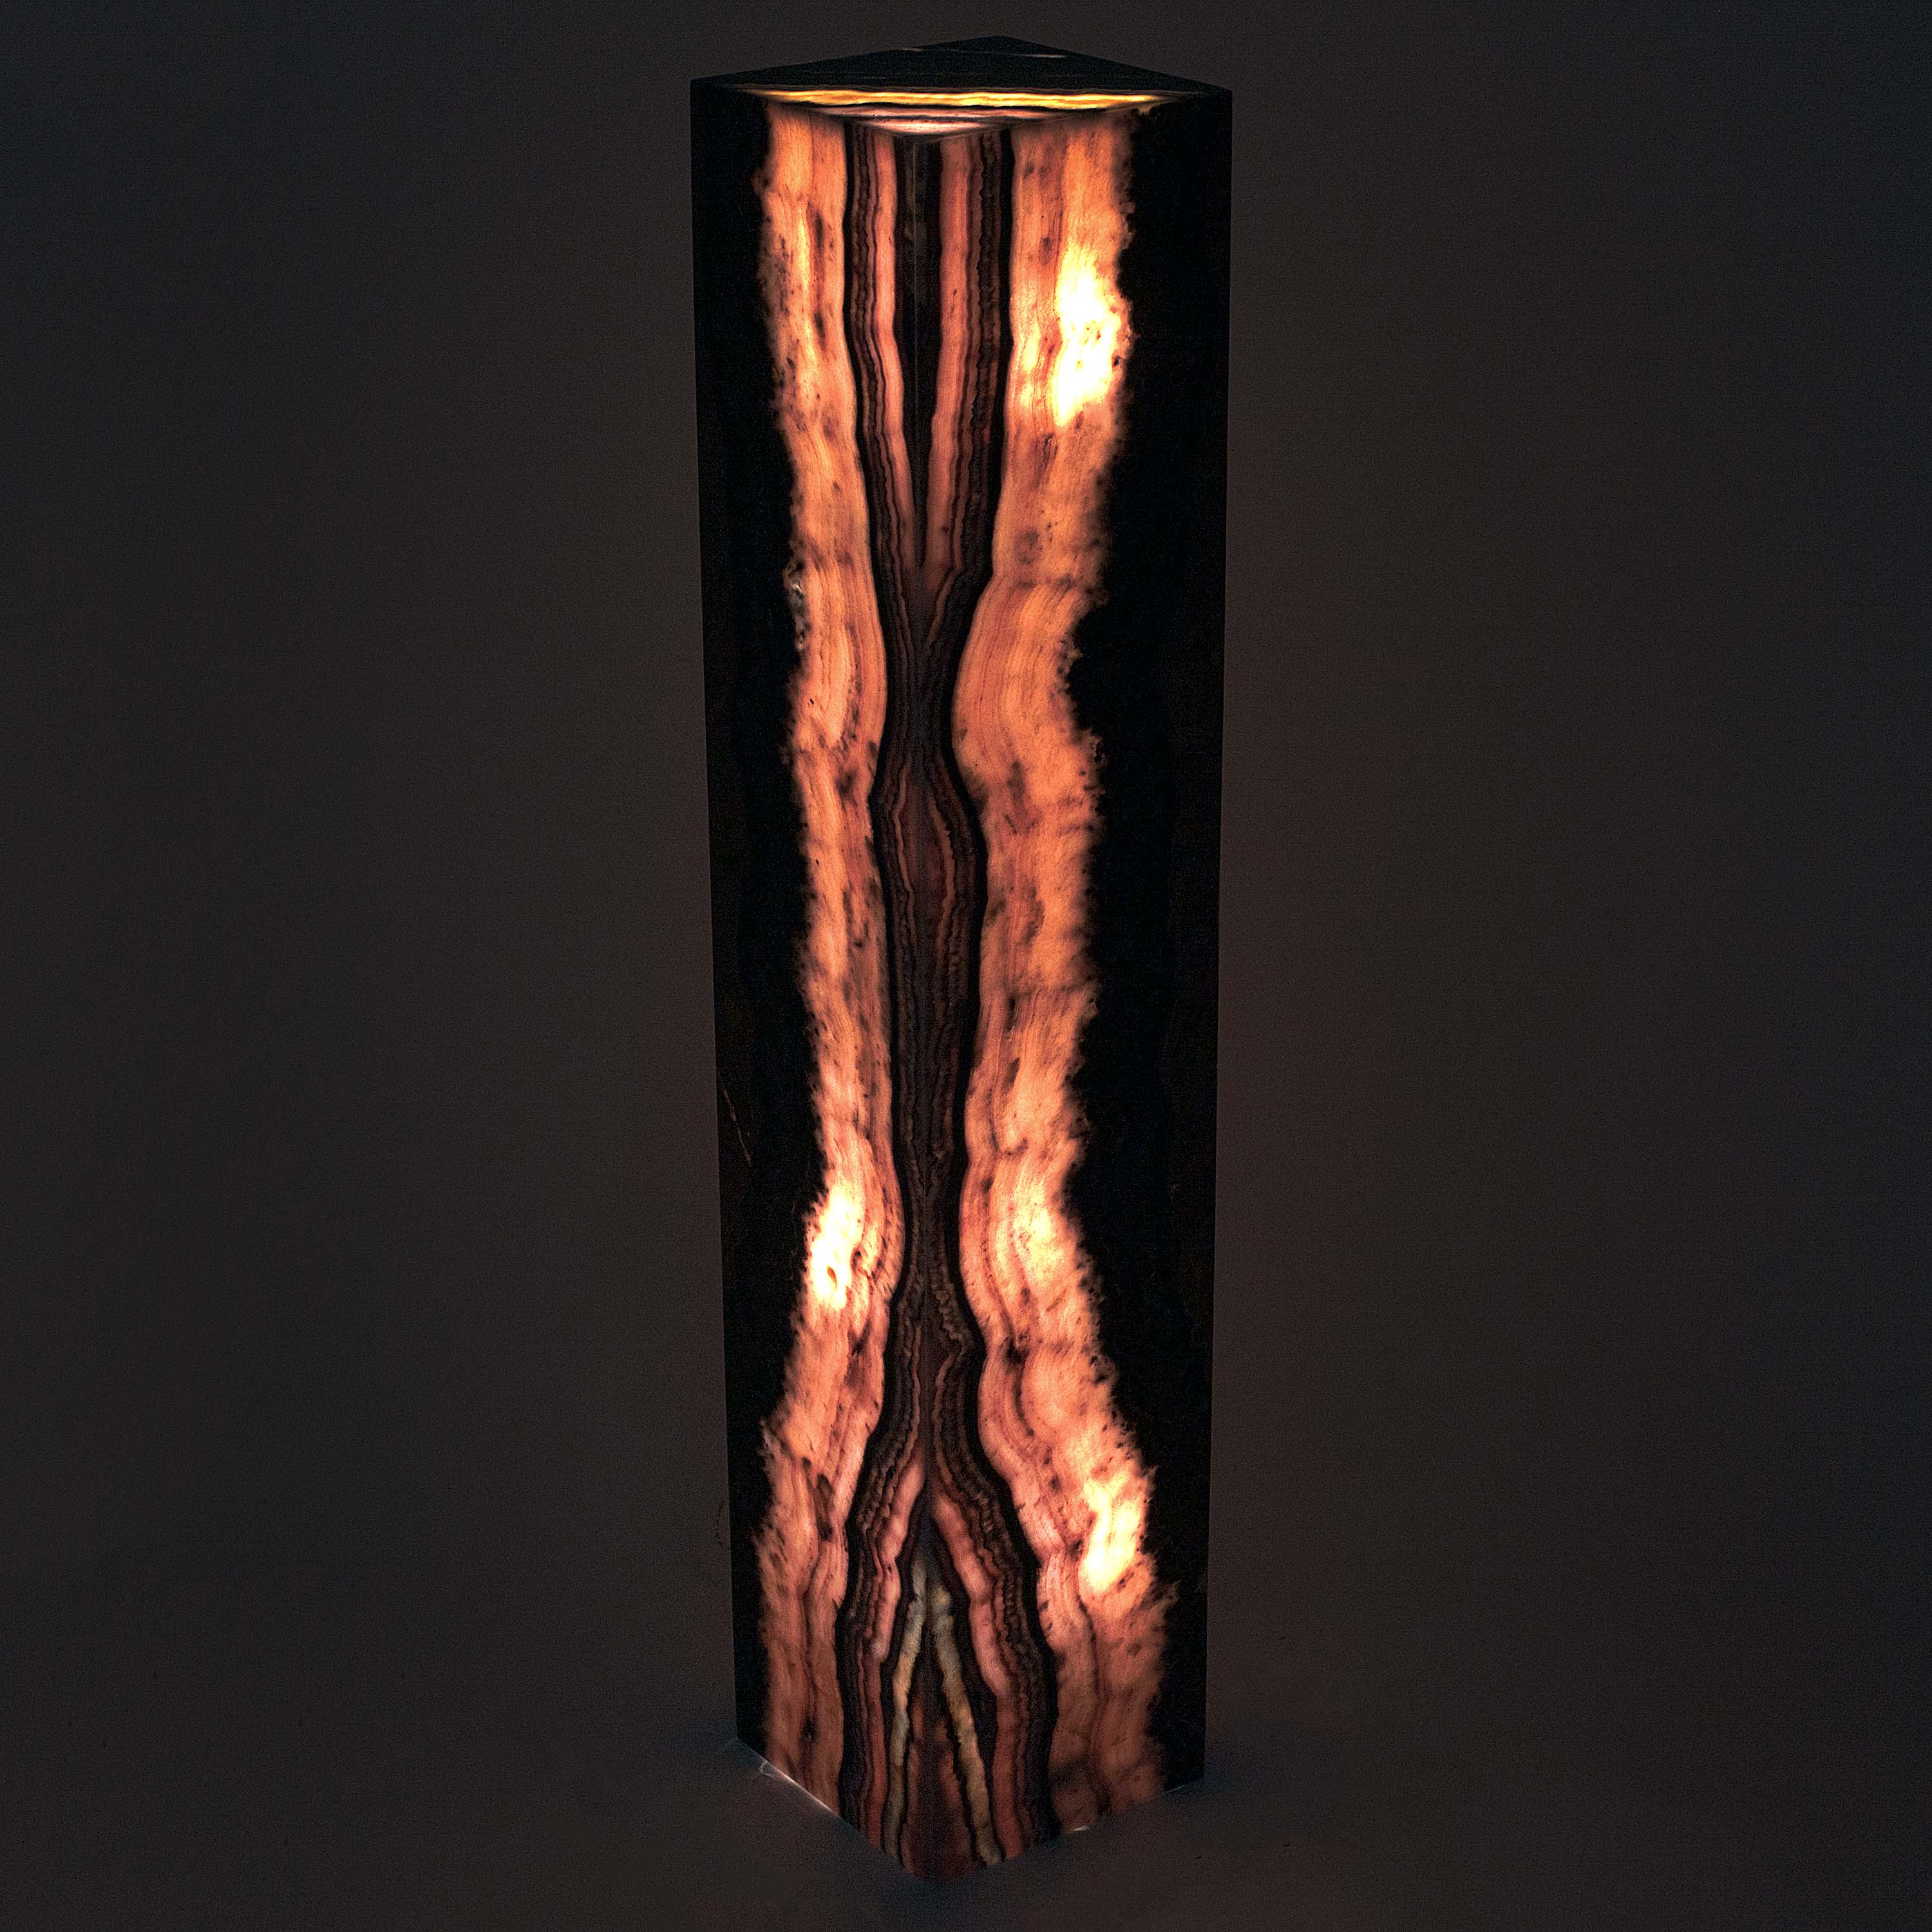 Kalifano Light Towers Natural Pink Onyx Lamp Light Tower from Mexico - 39" tall LT10020-PK.002